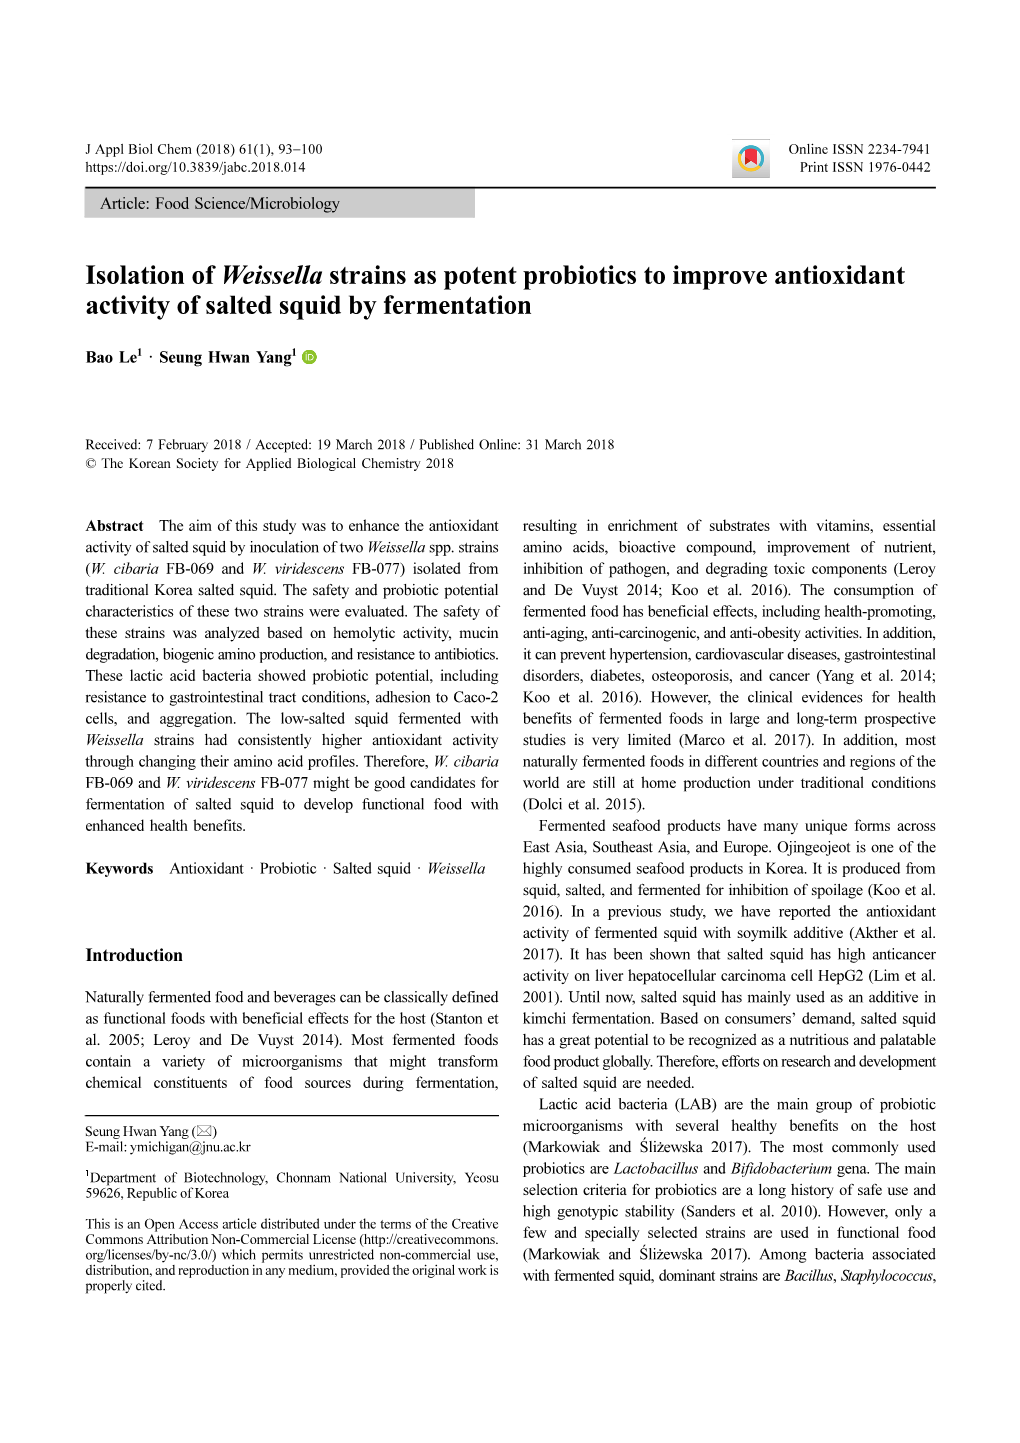 Isolation of Weissella Strains As Potent Probiotics to Improve Antioxidant Activity of Salted Squid by Fermentation